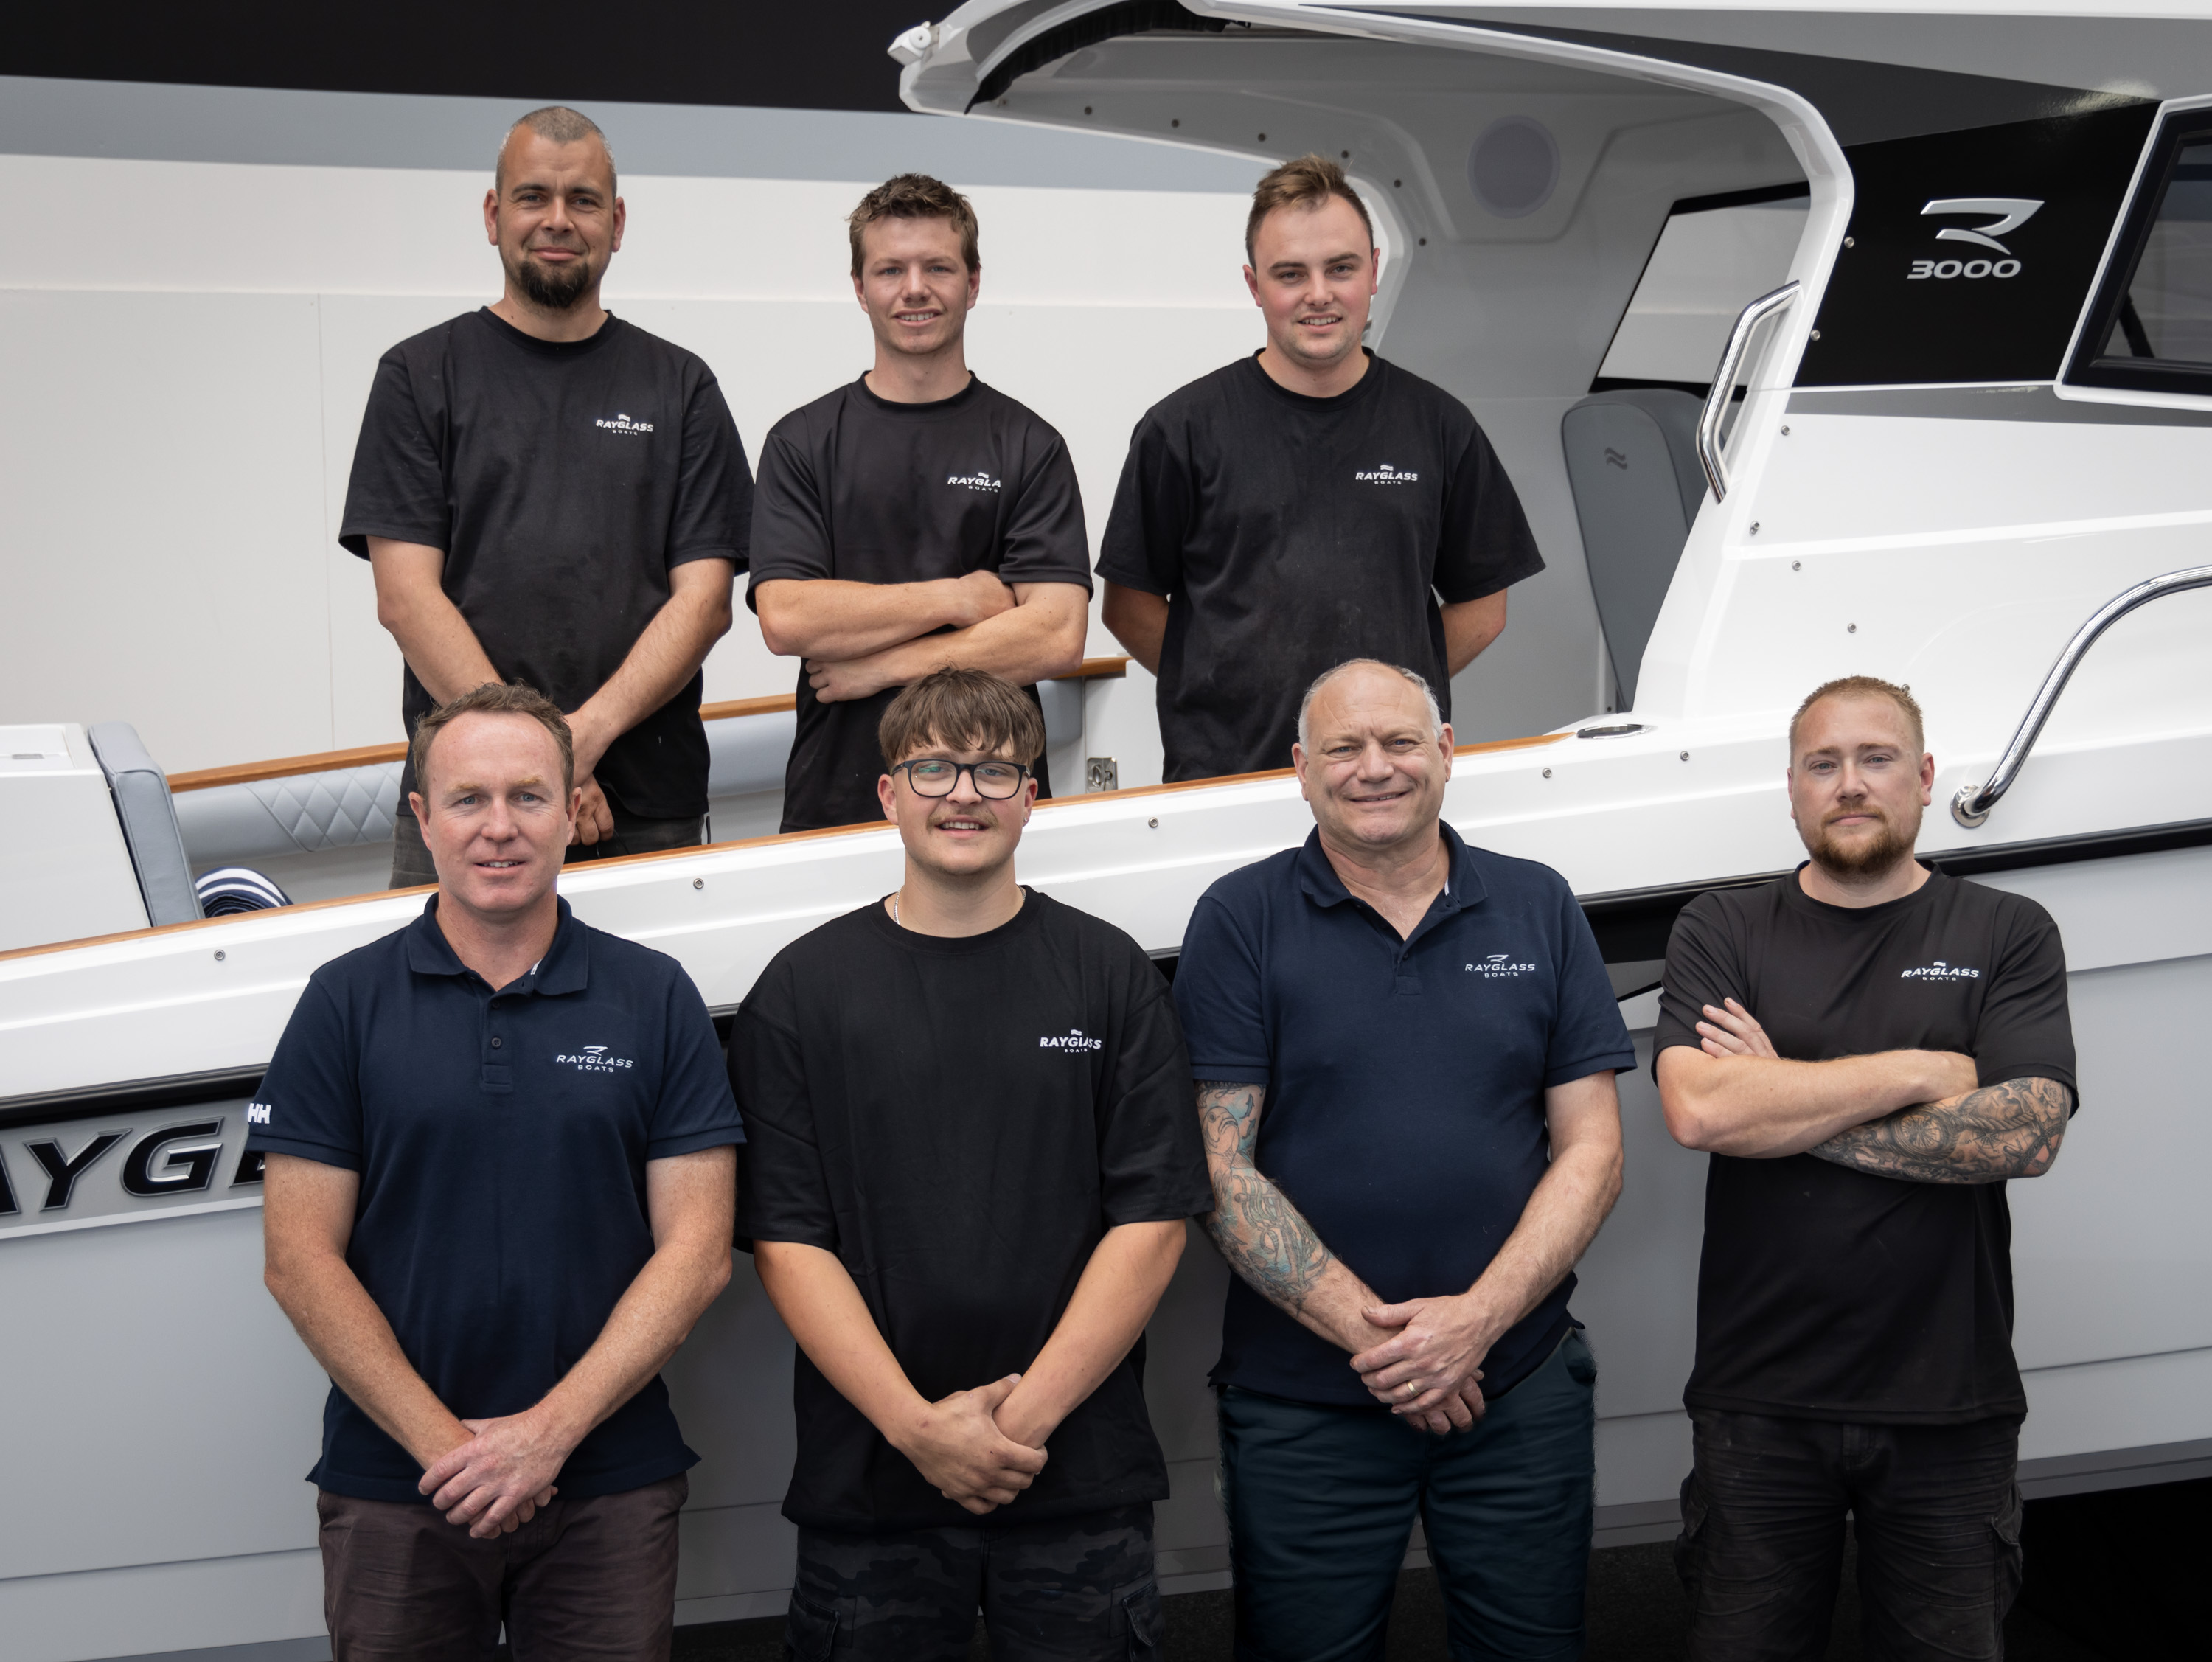 Tony (second from the right, bottom row) with his service team including service advisor Mike Thompson (bottom left)